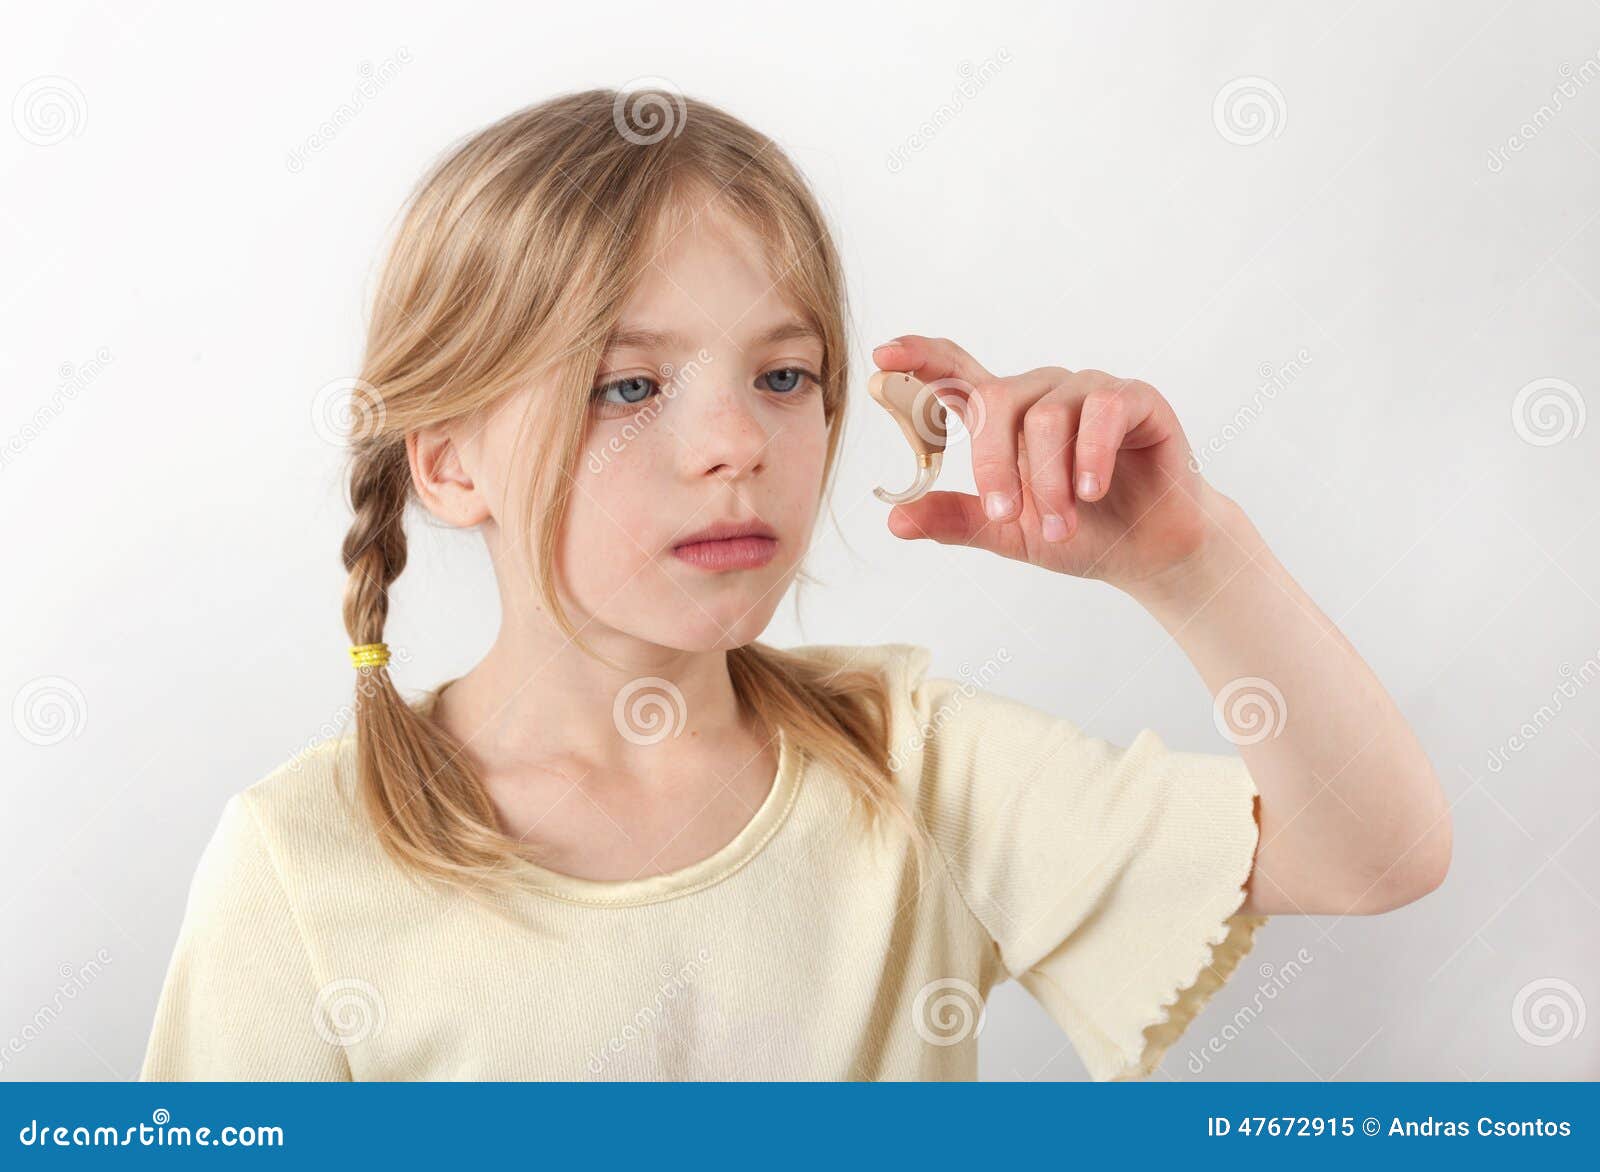 Girl s new hearing aid stock image. Image of blue, ispect - 47672915